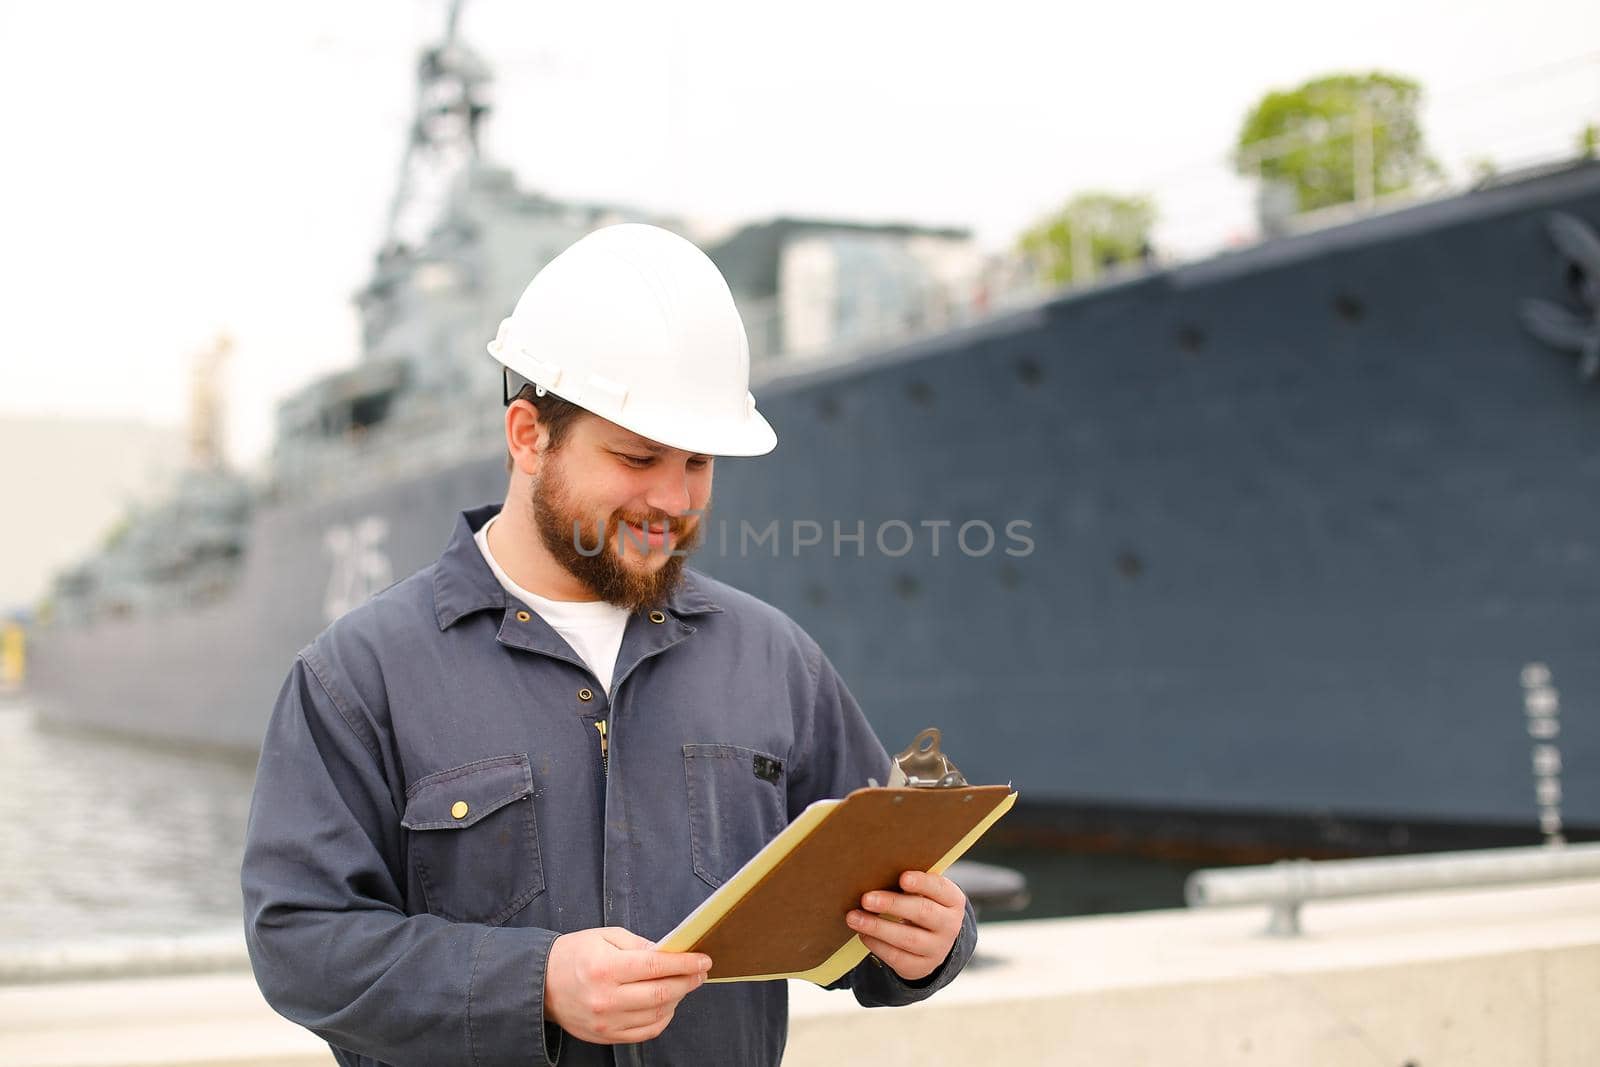 Deckhand wearing helmet and holding papers documents, standing on coast near vessel. Concept of maritime job and engineering department of marine team.